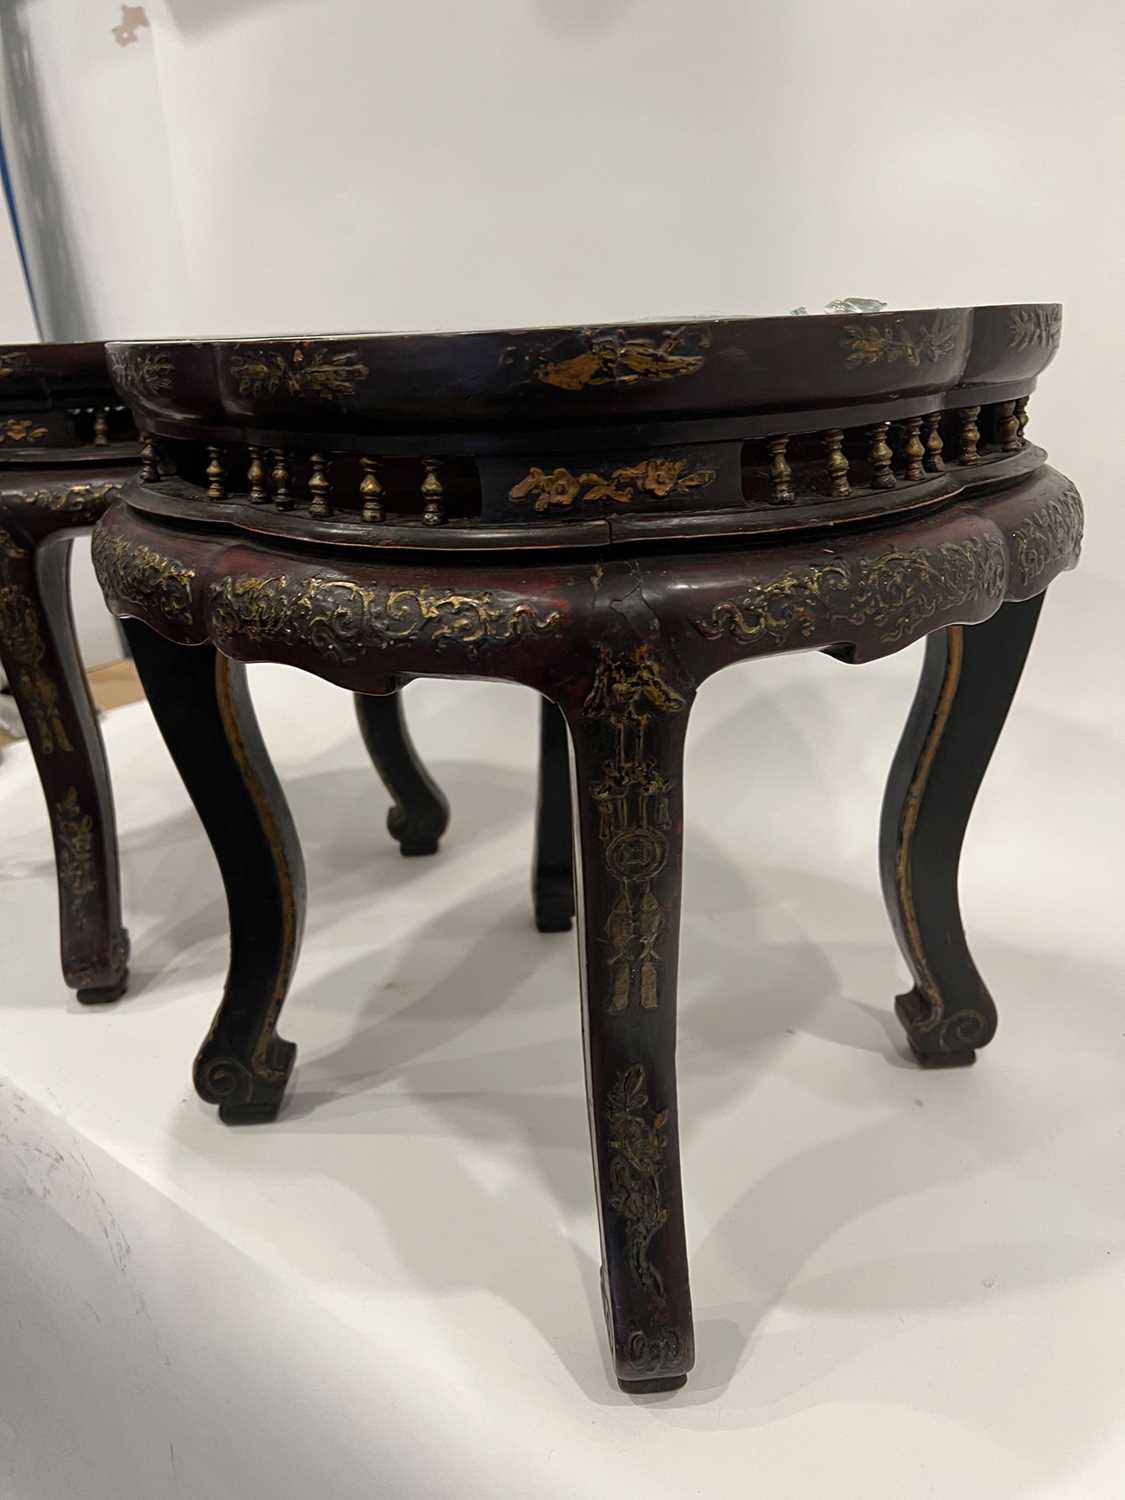 A PAIR OF 19TH CENTURY CHINESE CARVED HARDWOOD AND PARCEL GILT DECORATED STANDS - Image 4 of 5